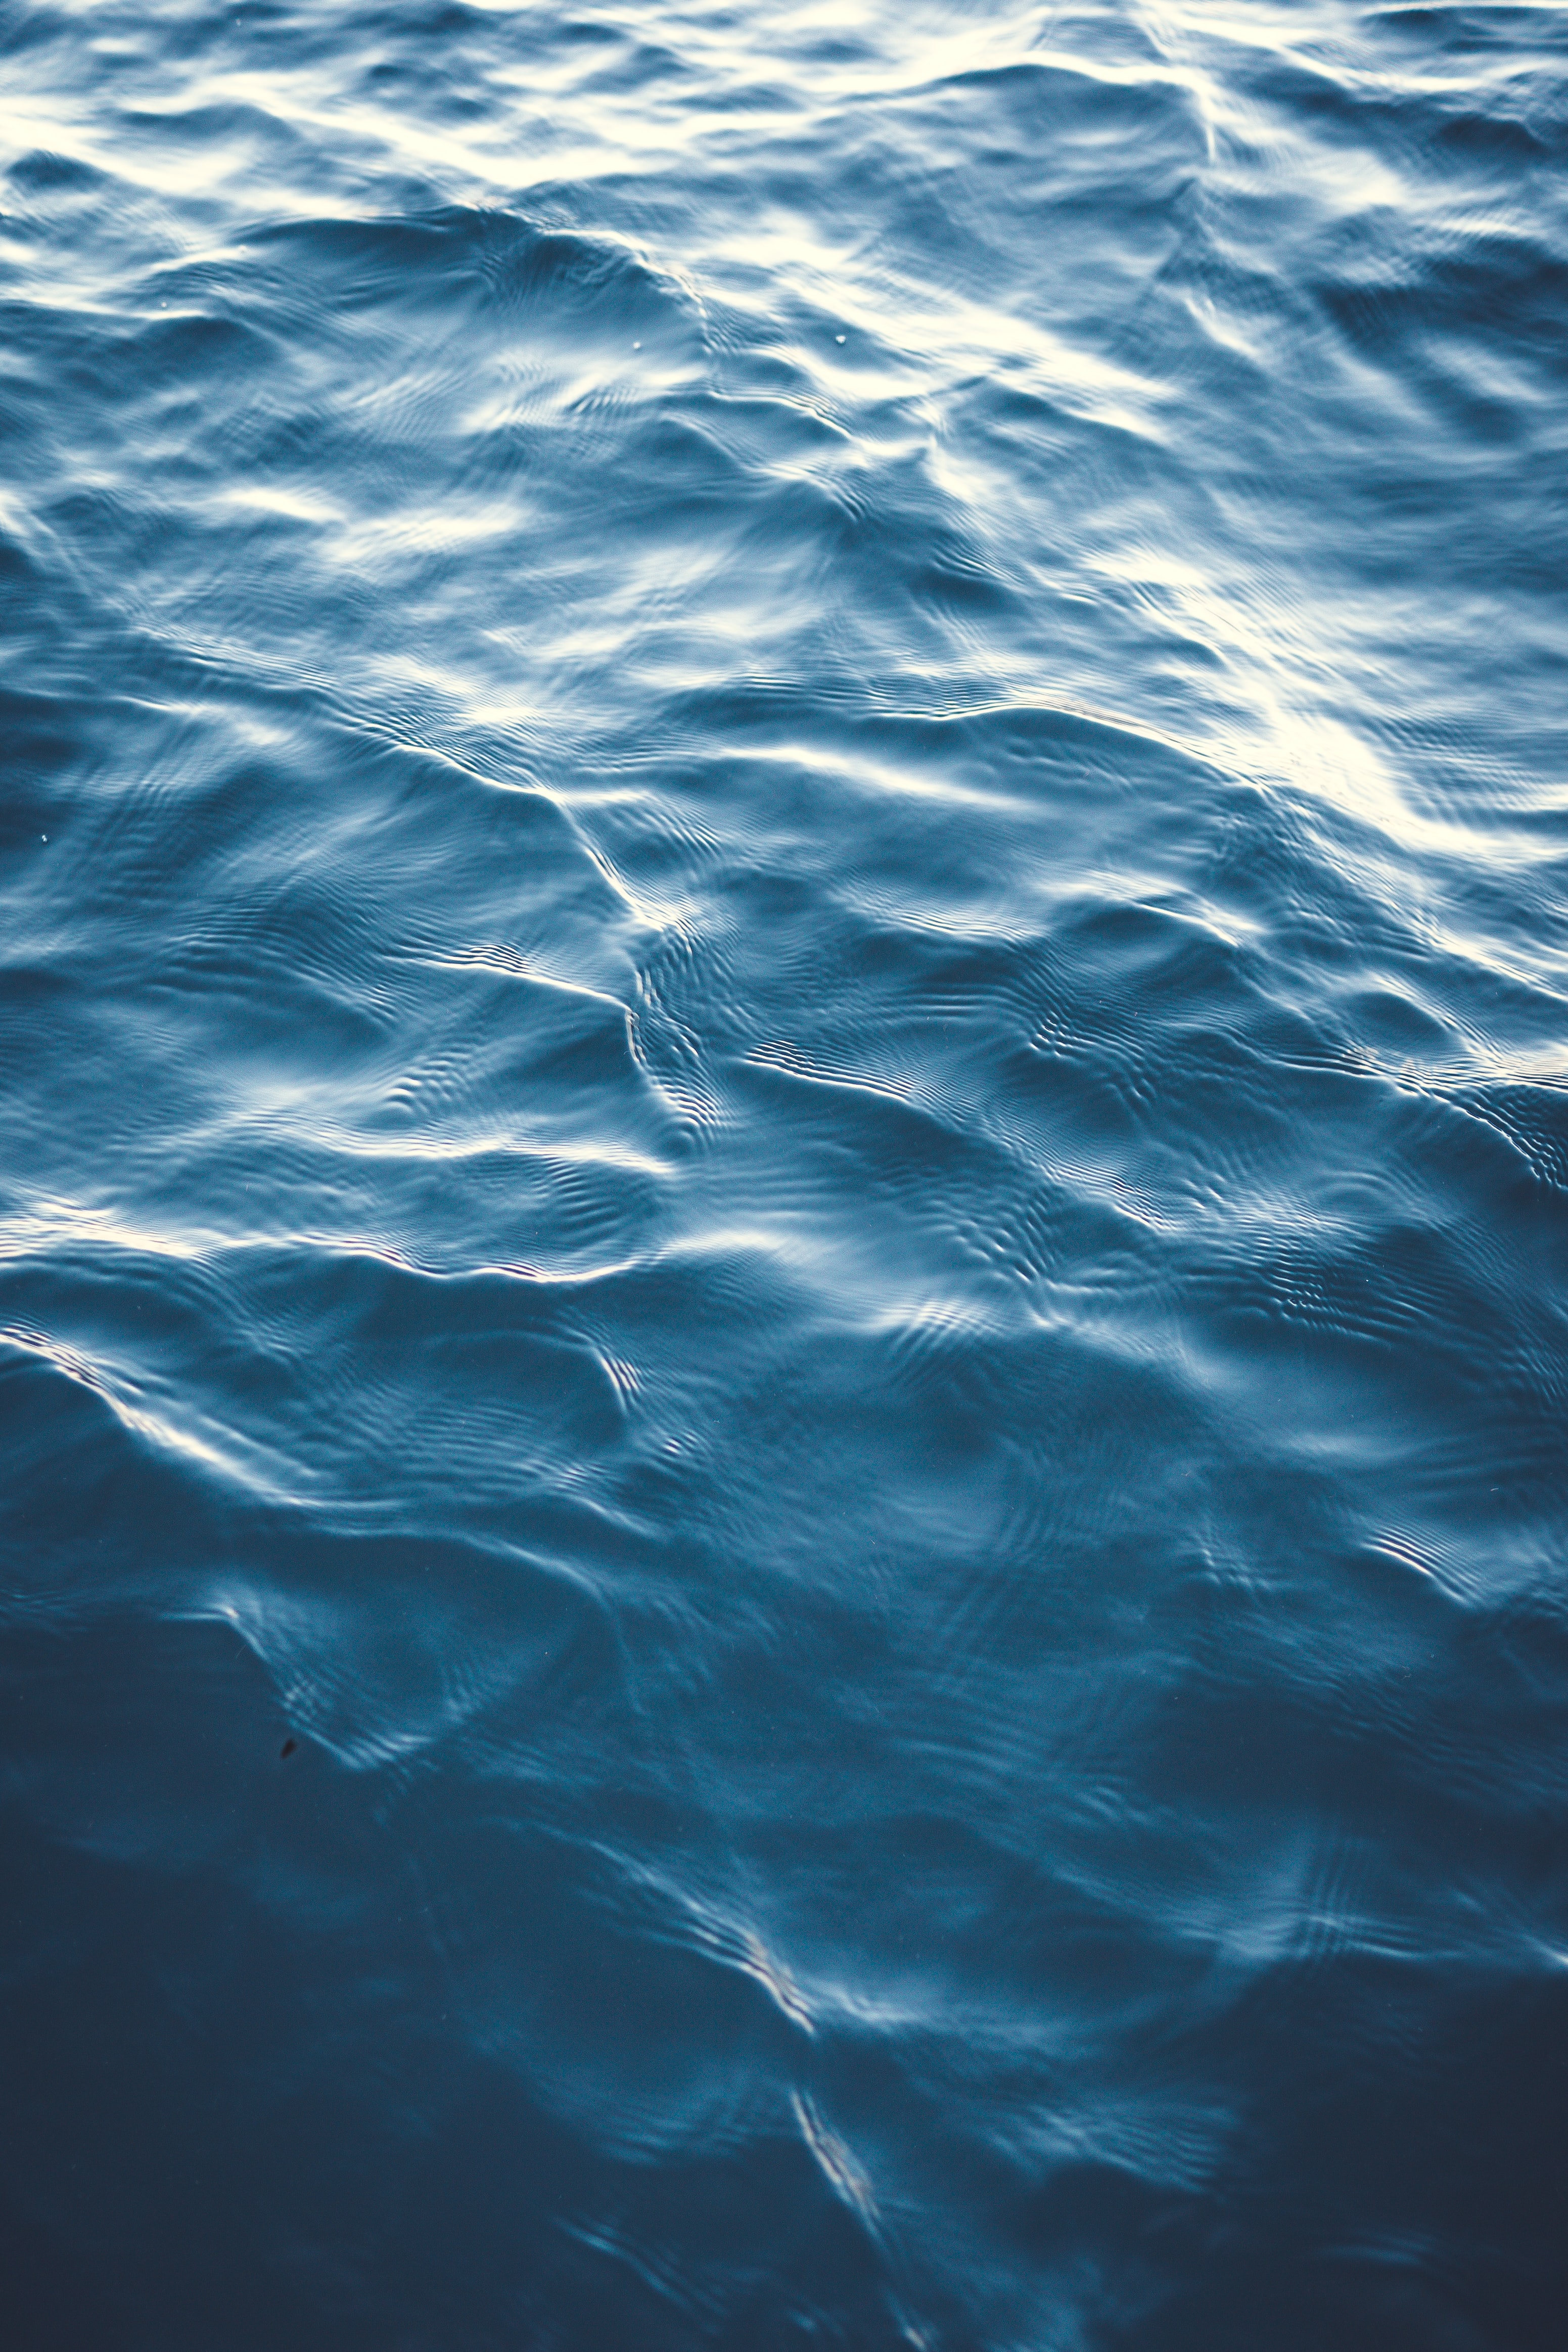 textures, texture, ripples, water, waves, ripple, wavy, distortion